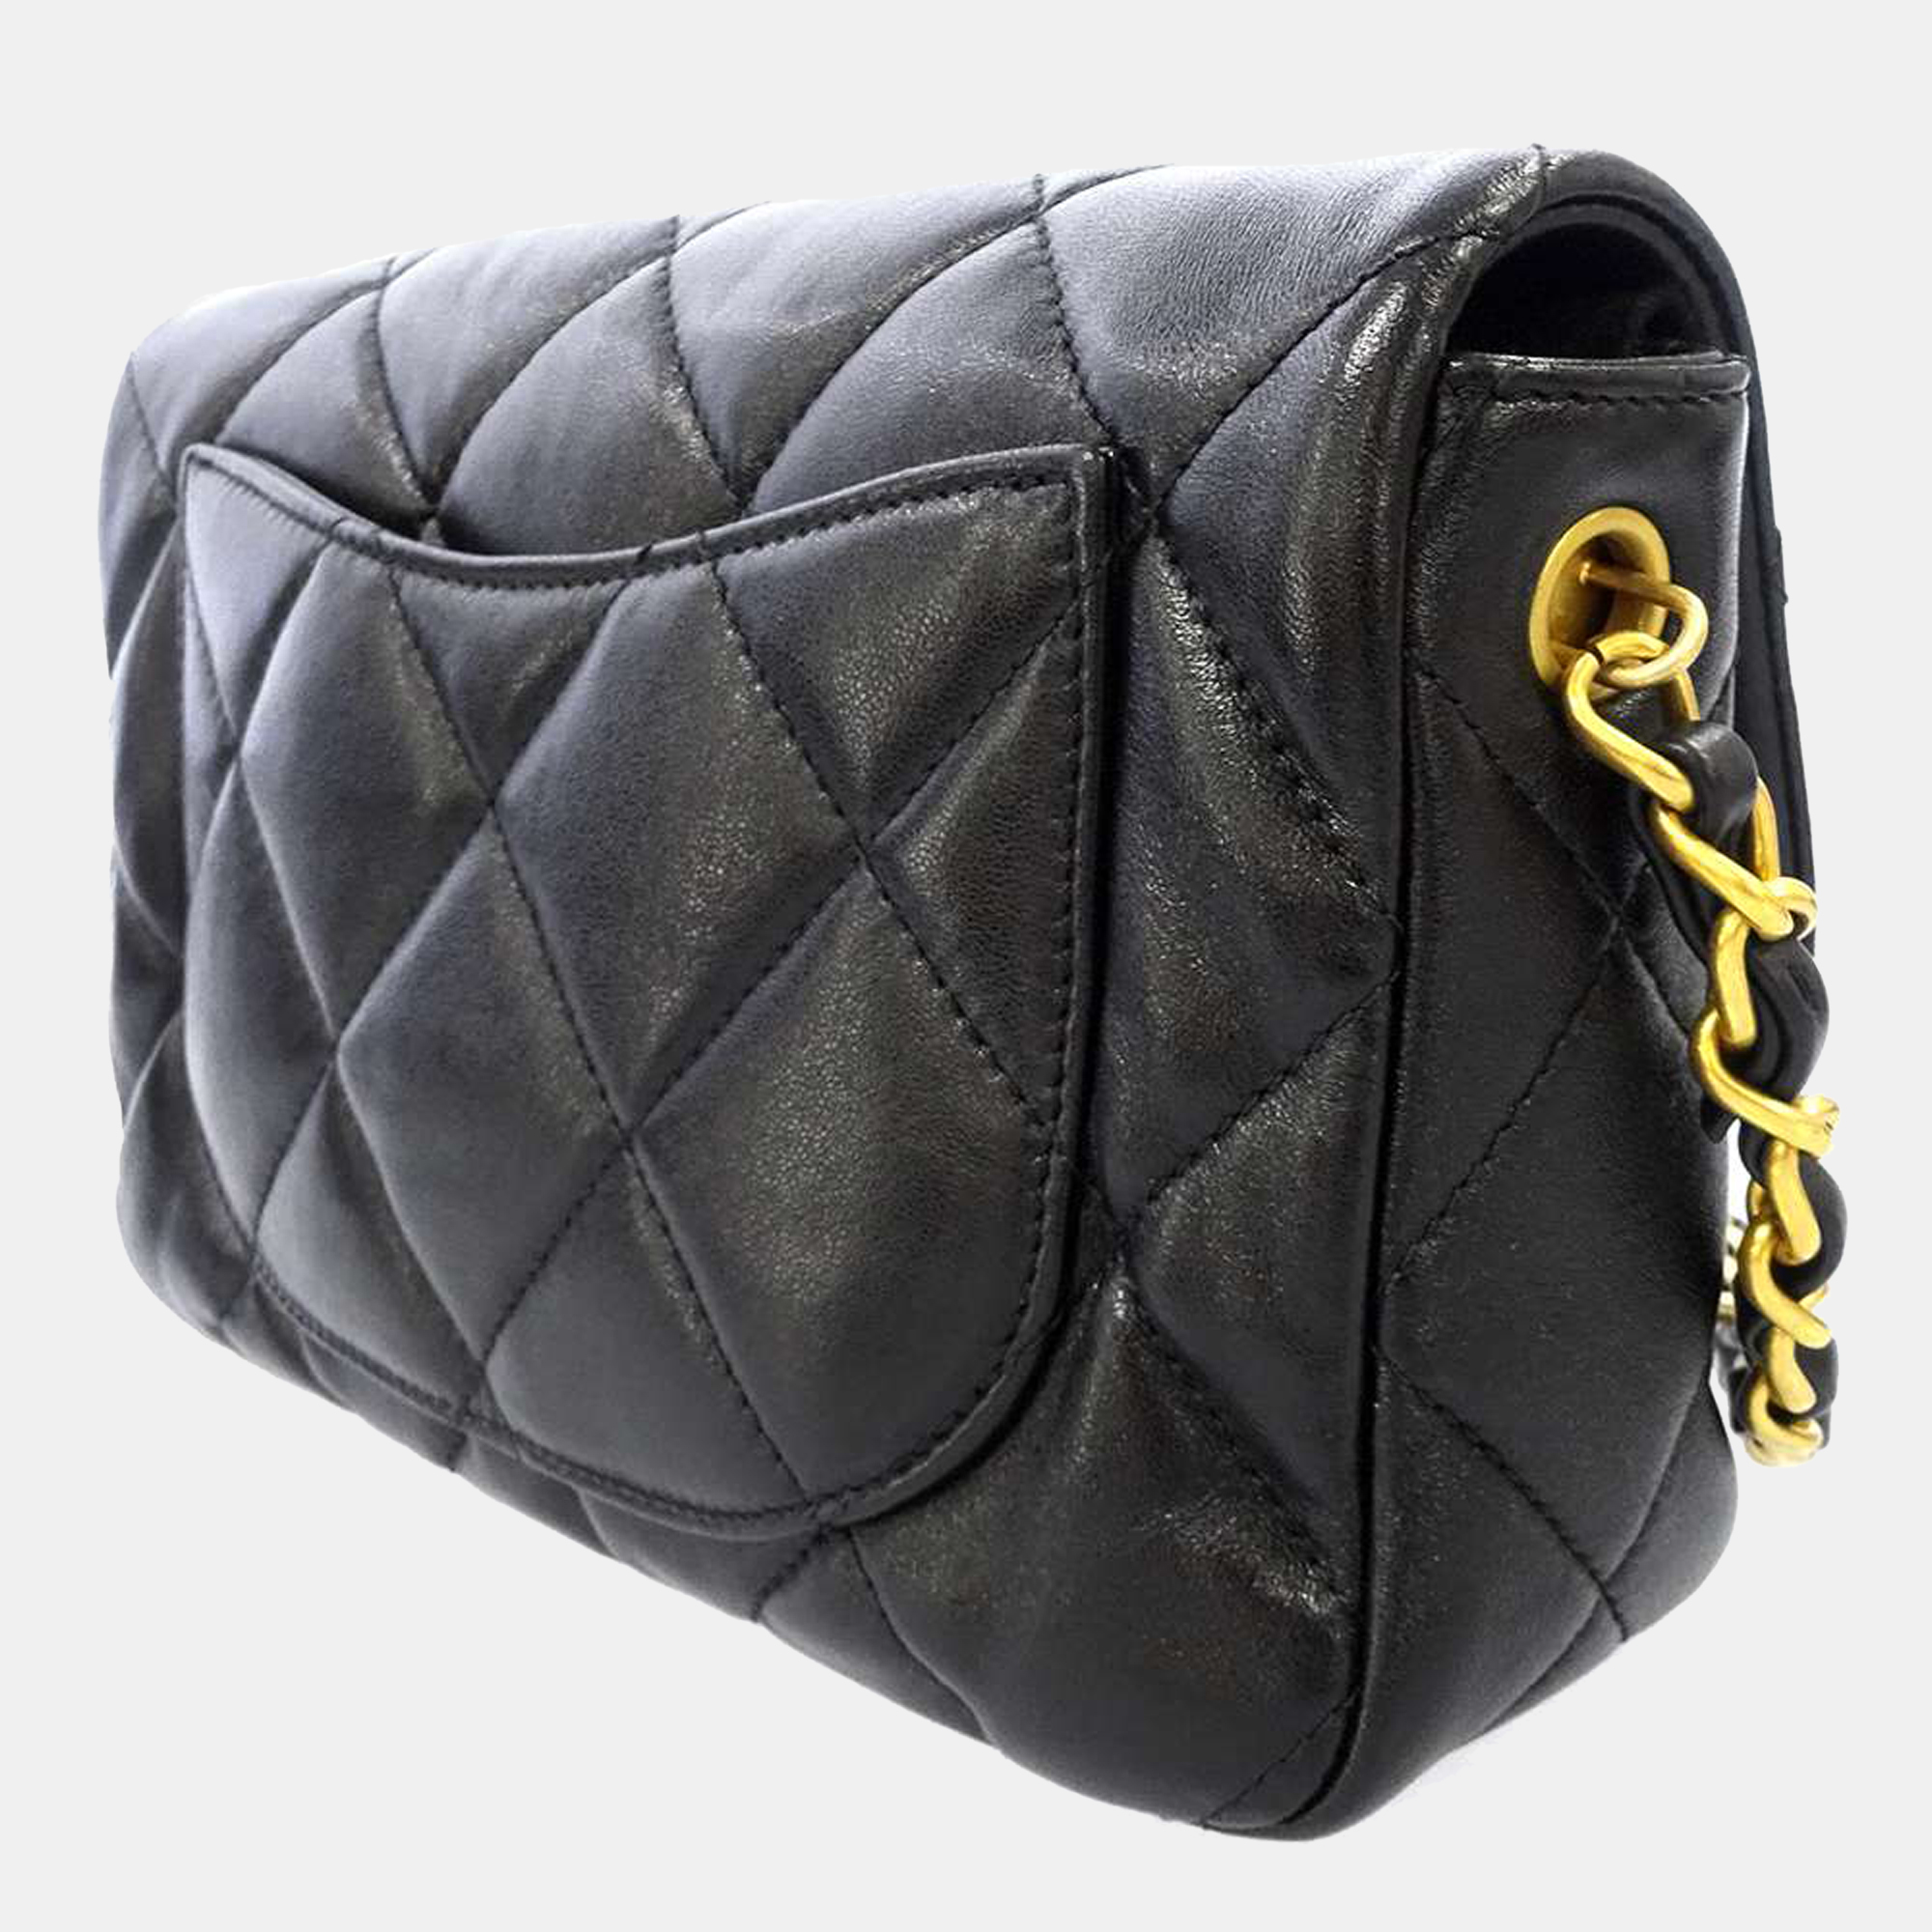 

Chanel Black Lambskin Leather Heart Coco Small Flap Bag Shoulder Bag